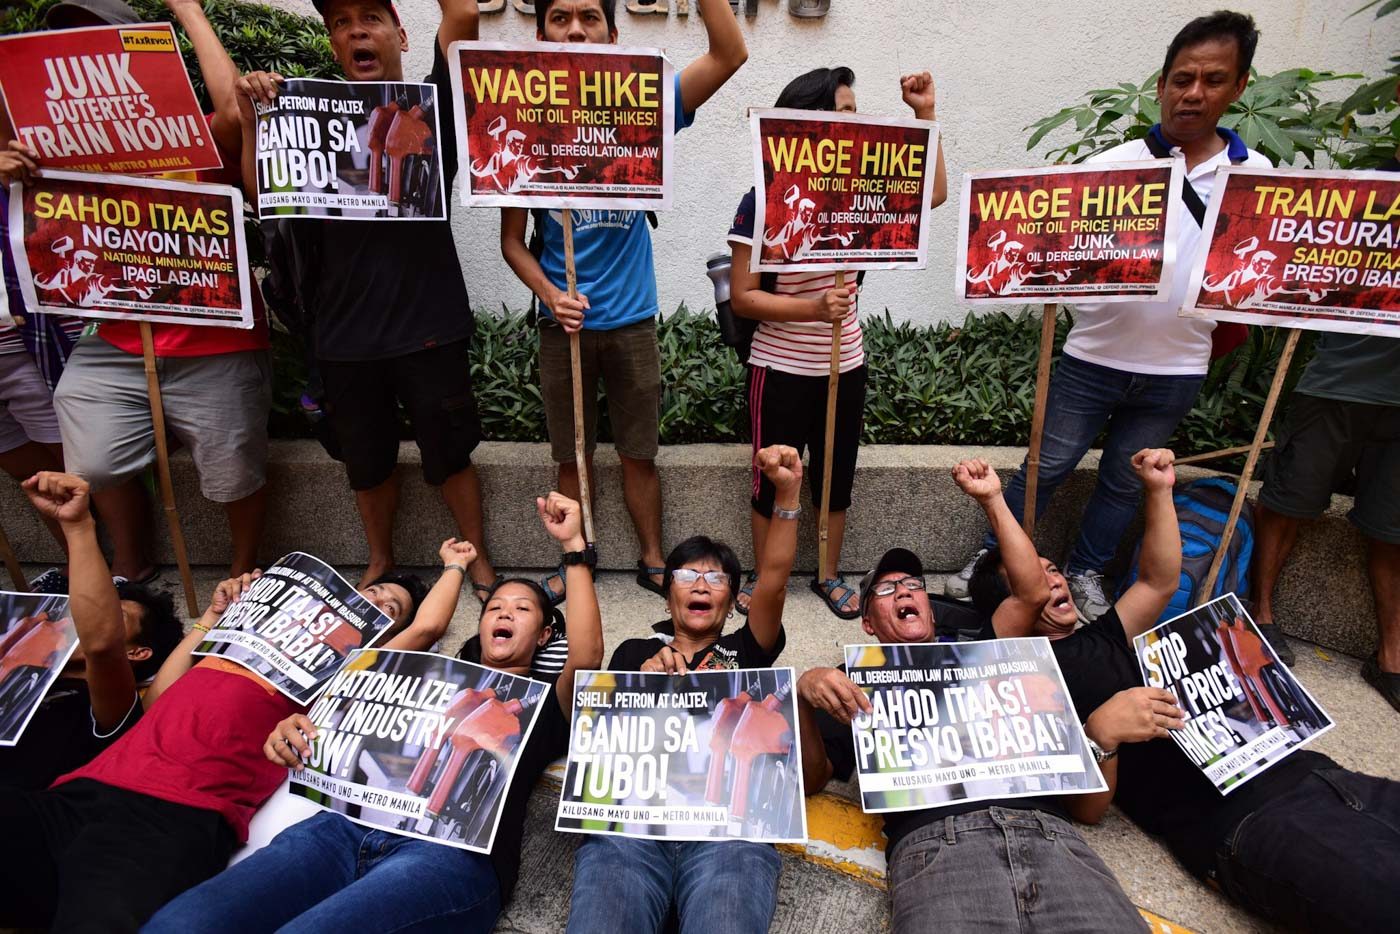 TRIPLE WHAMMY PROTEST. Militant labor group Kilusang Mayo Uno stage a die-in protest in government and private offices in Makati City on May 29, 2018 to call attention to various issues such as the rising prices of basic commodities, low wages, and labor contractualization. Photo by Maria Tan/Rappler  